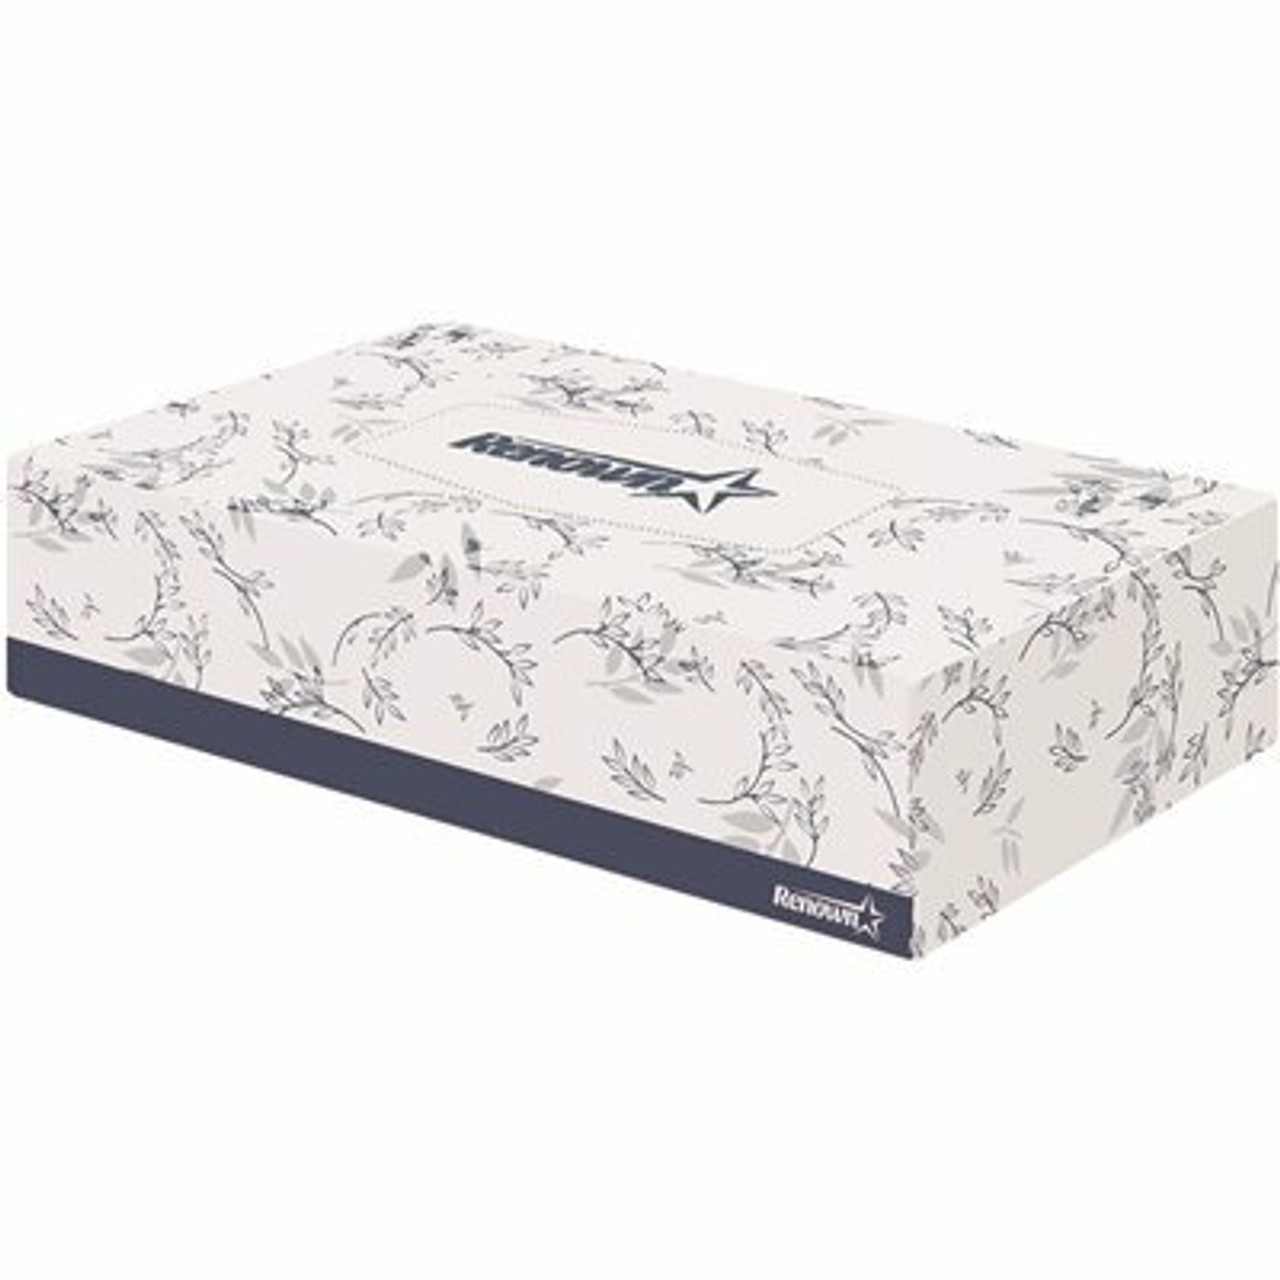 Renown 2-Ply Flat Box Facial Tissue (100-Count)